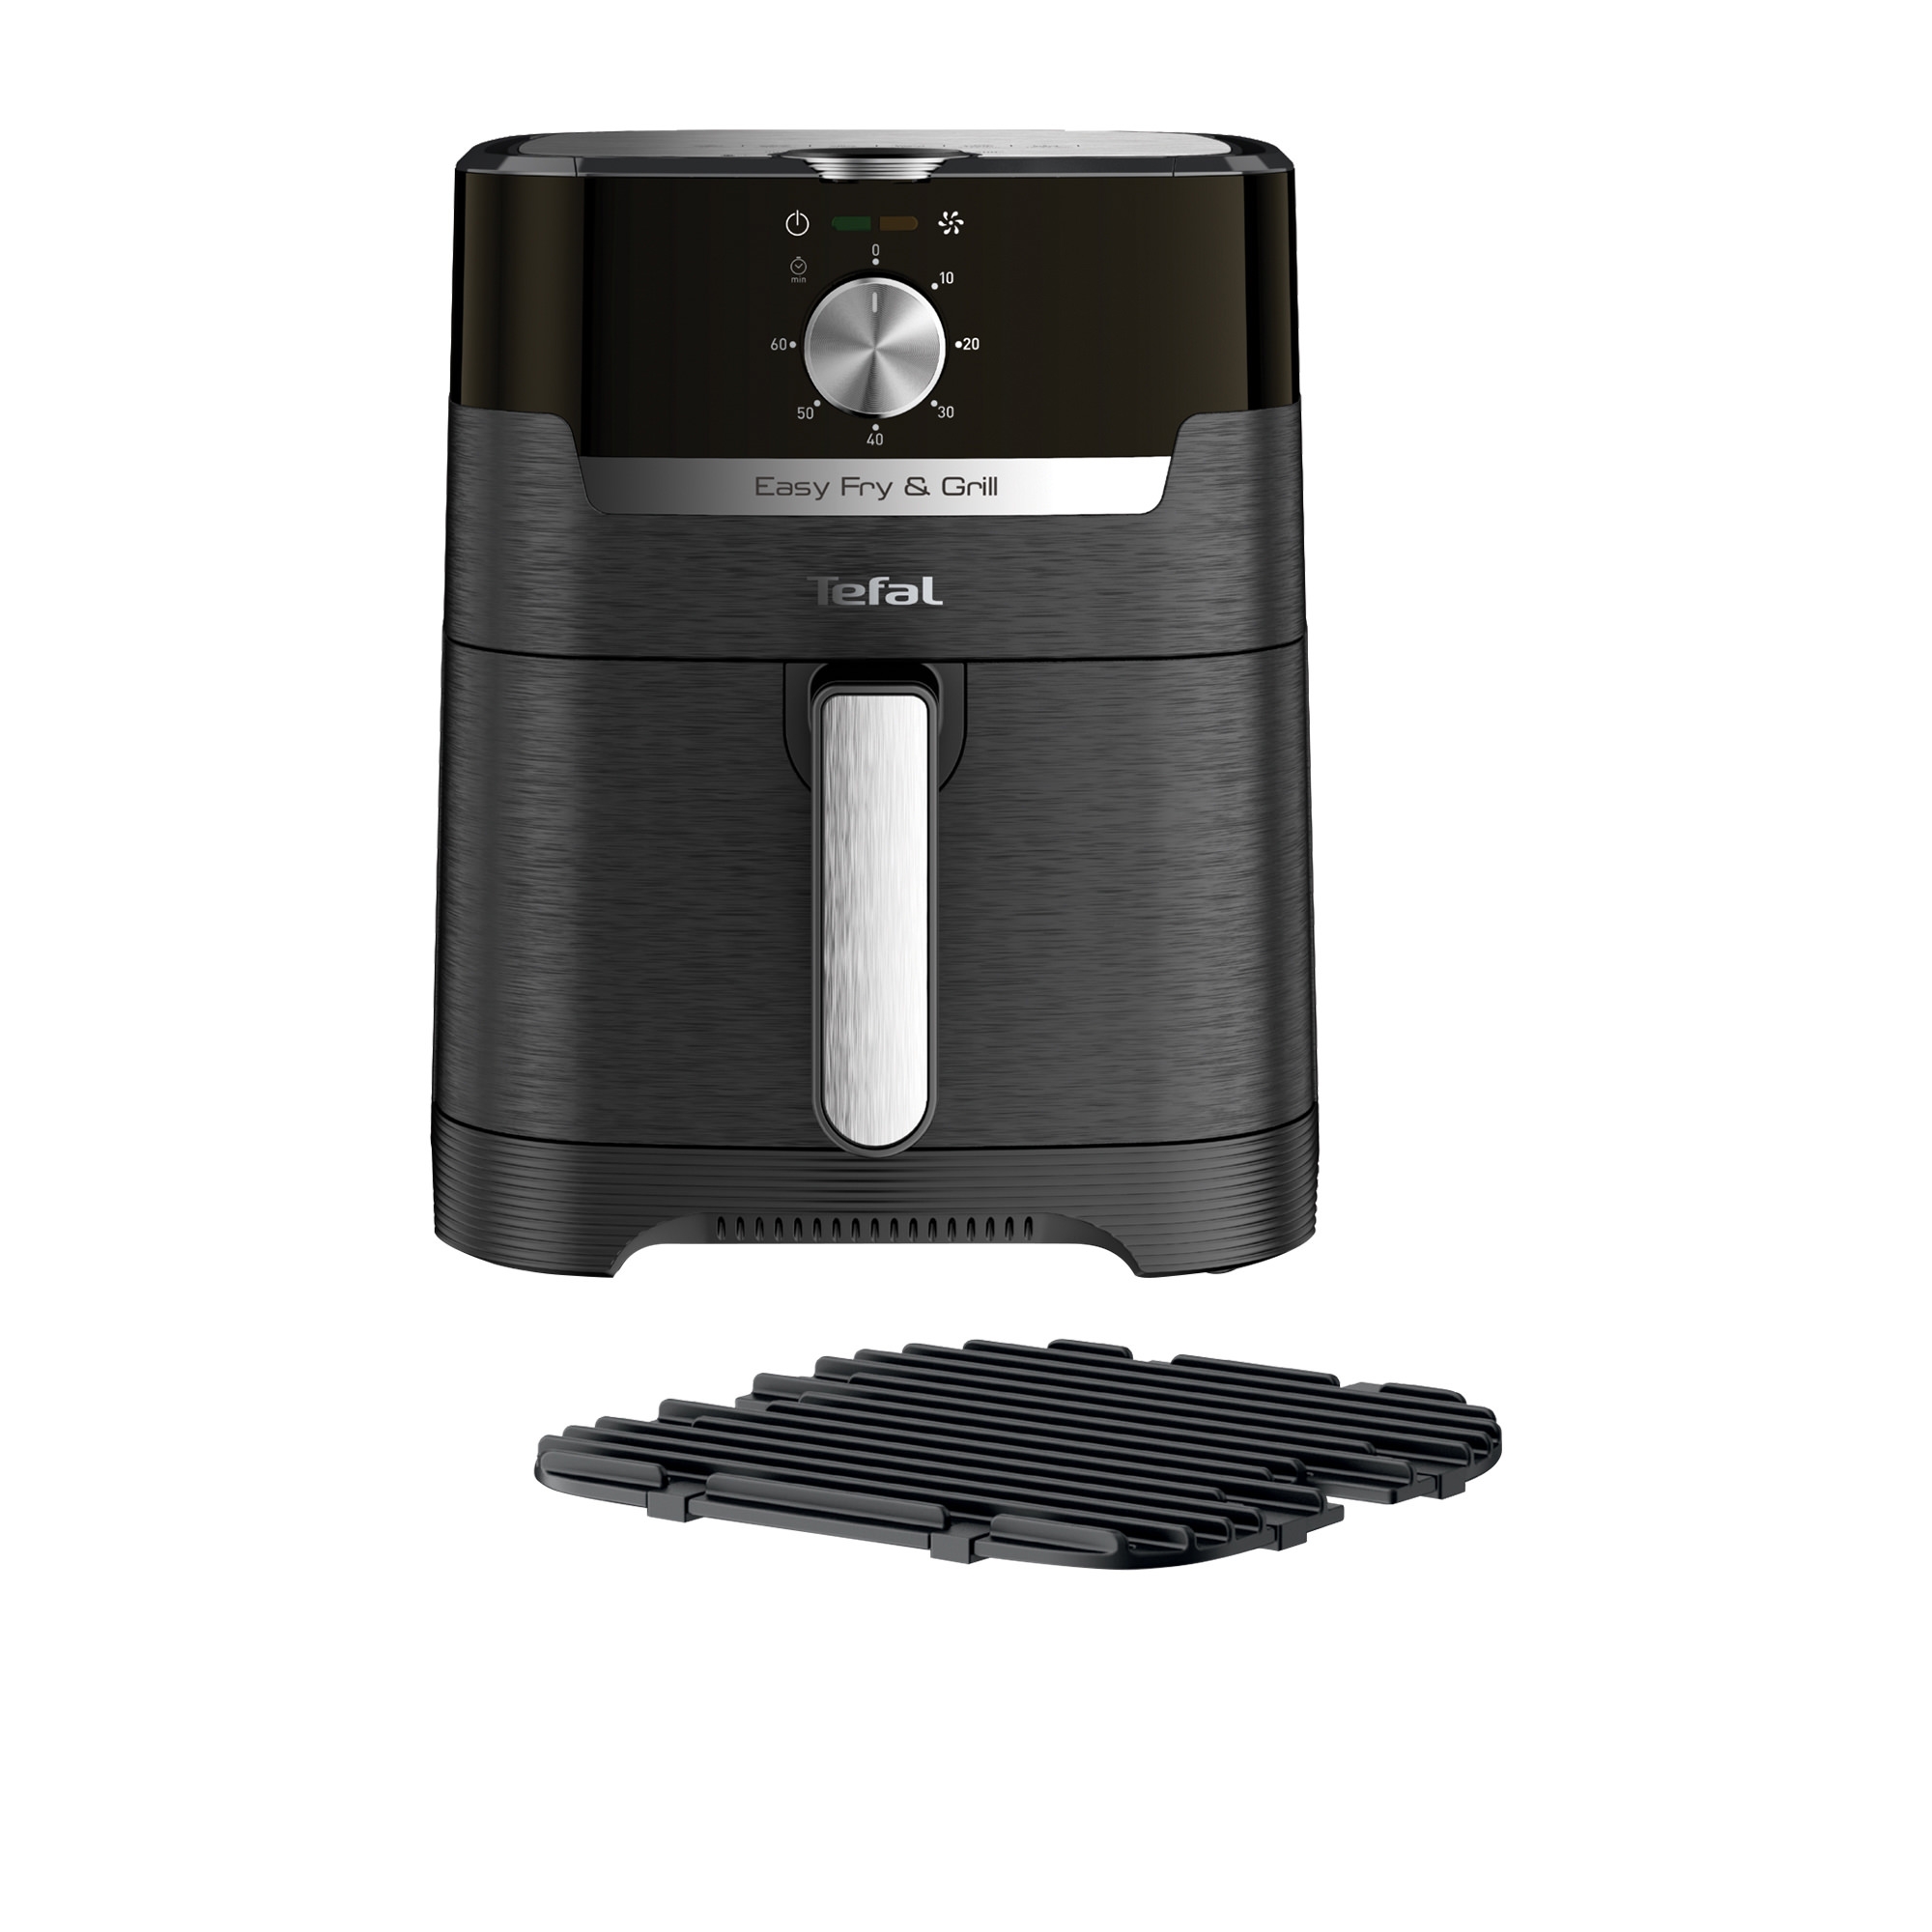 Tefal Easy Fry & Grill EY5018 Classic Air Fryer 4.2L Black Image 1